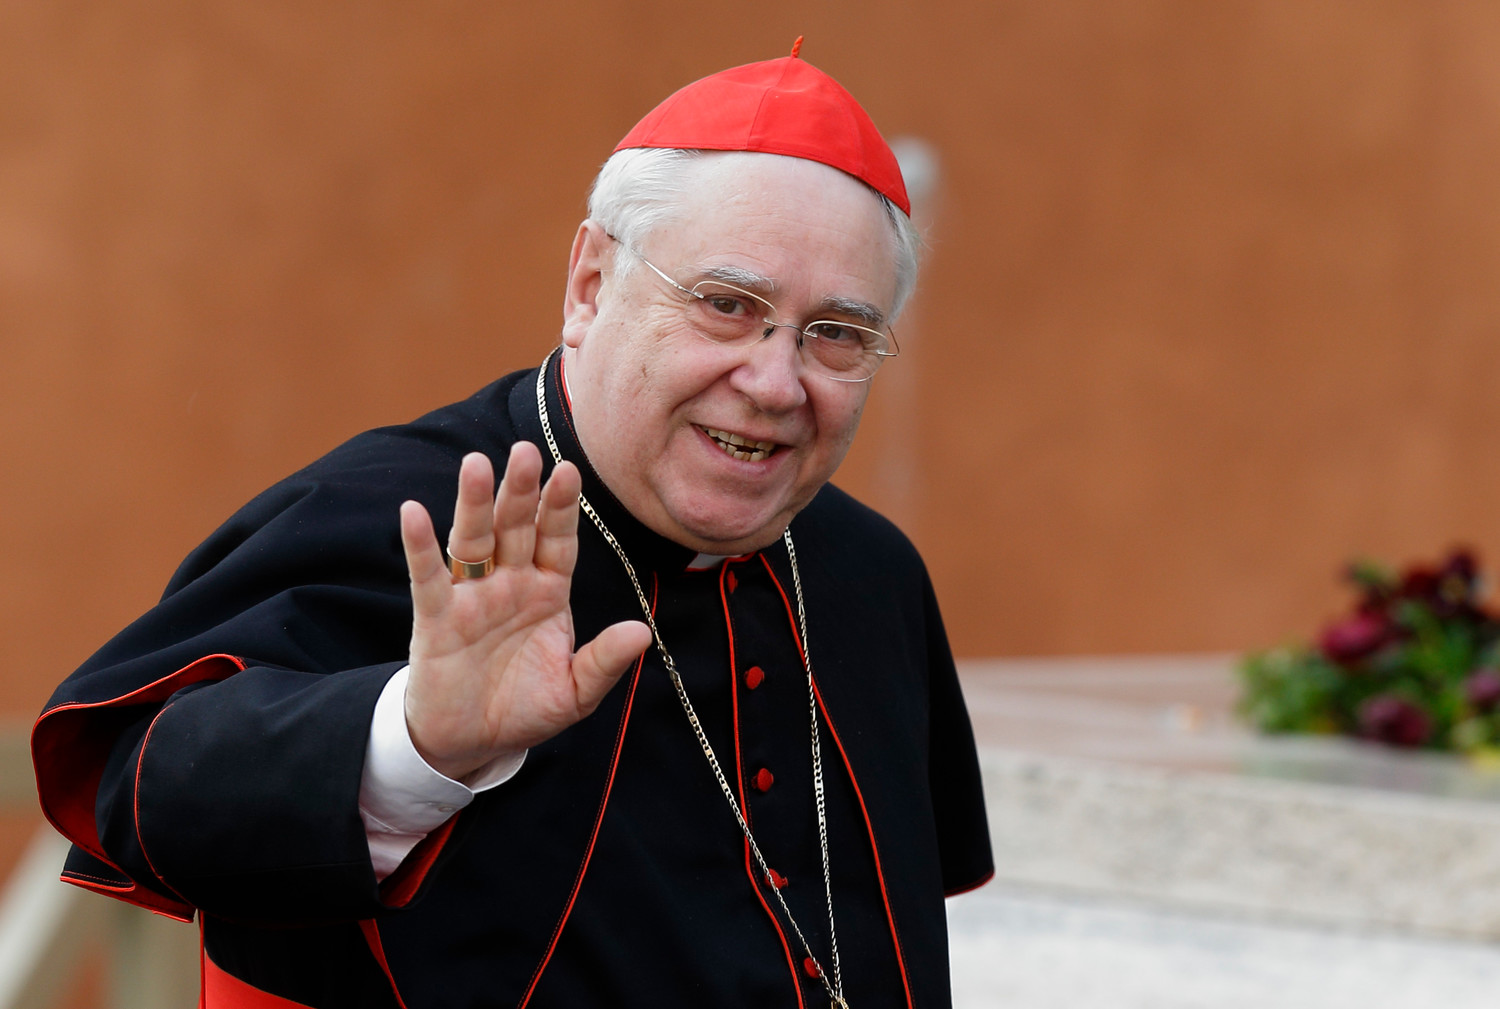 Italian Cardinal Domenico Calcagno, president of the Administration of the Patrimony of the Holy See, is seen at the Vatican in this 2013 file photo.